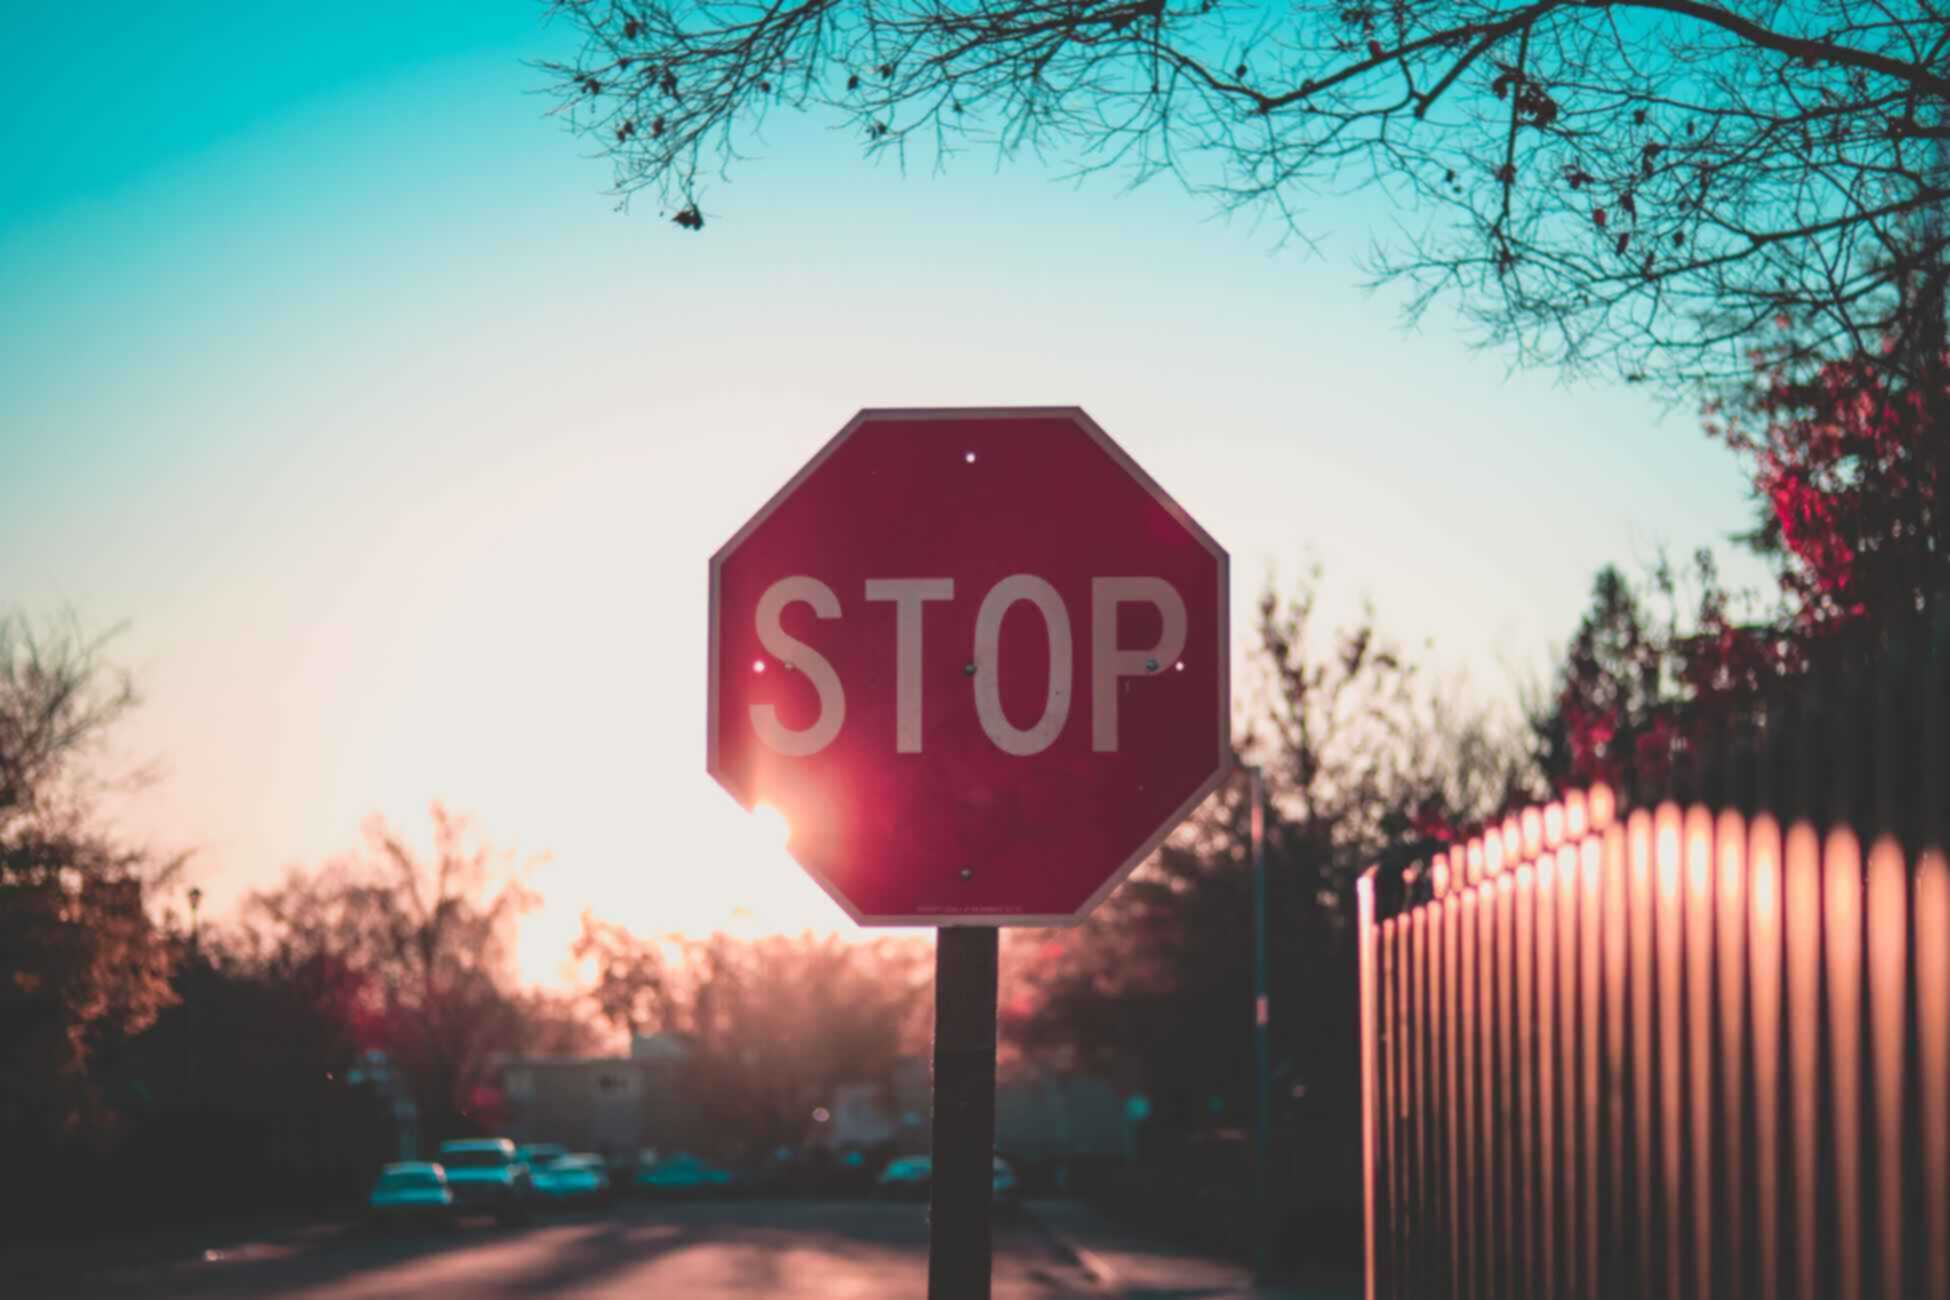 A stop sign on a street